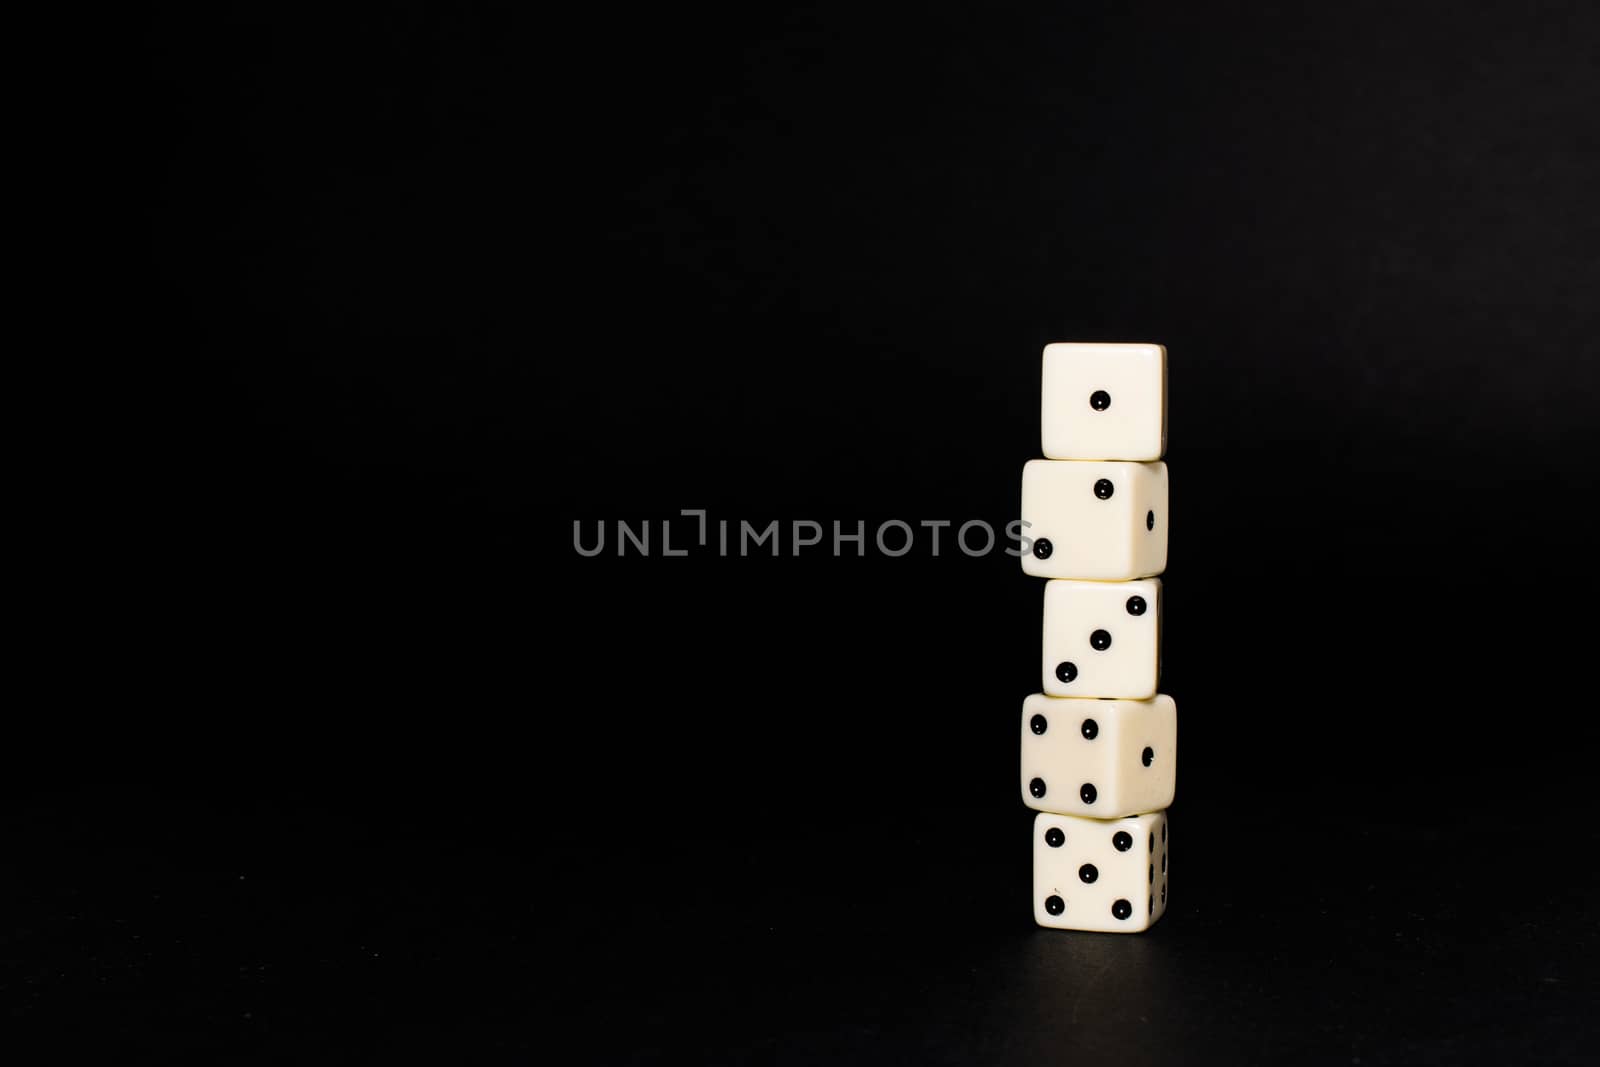 Five dice disposed in vertical position on a black background